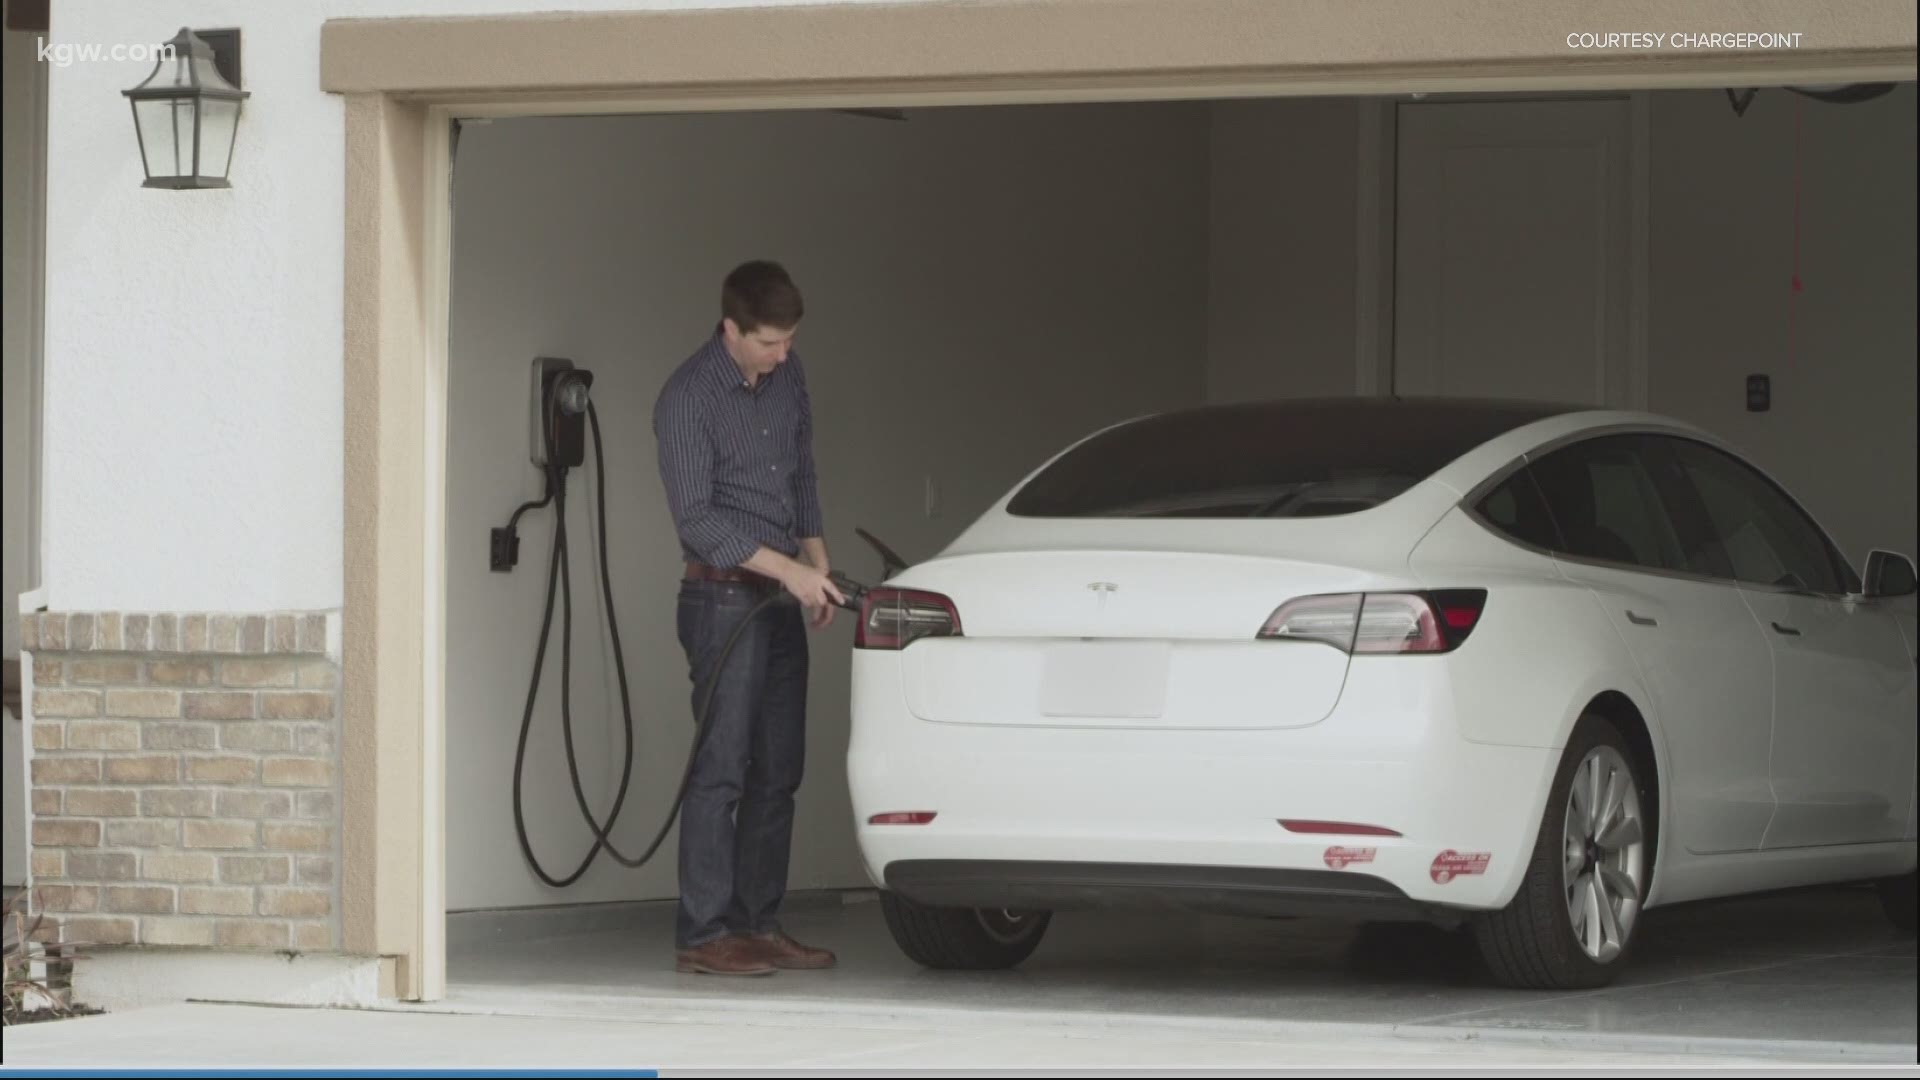 PGE Offers 500 Rebate For Electric Vehicle Chargers Kgw